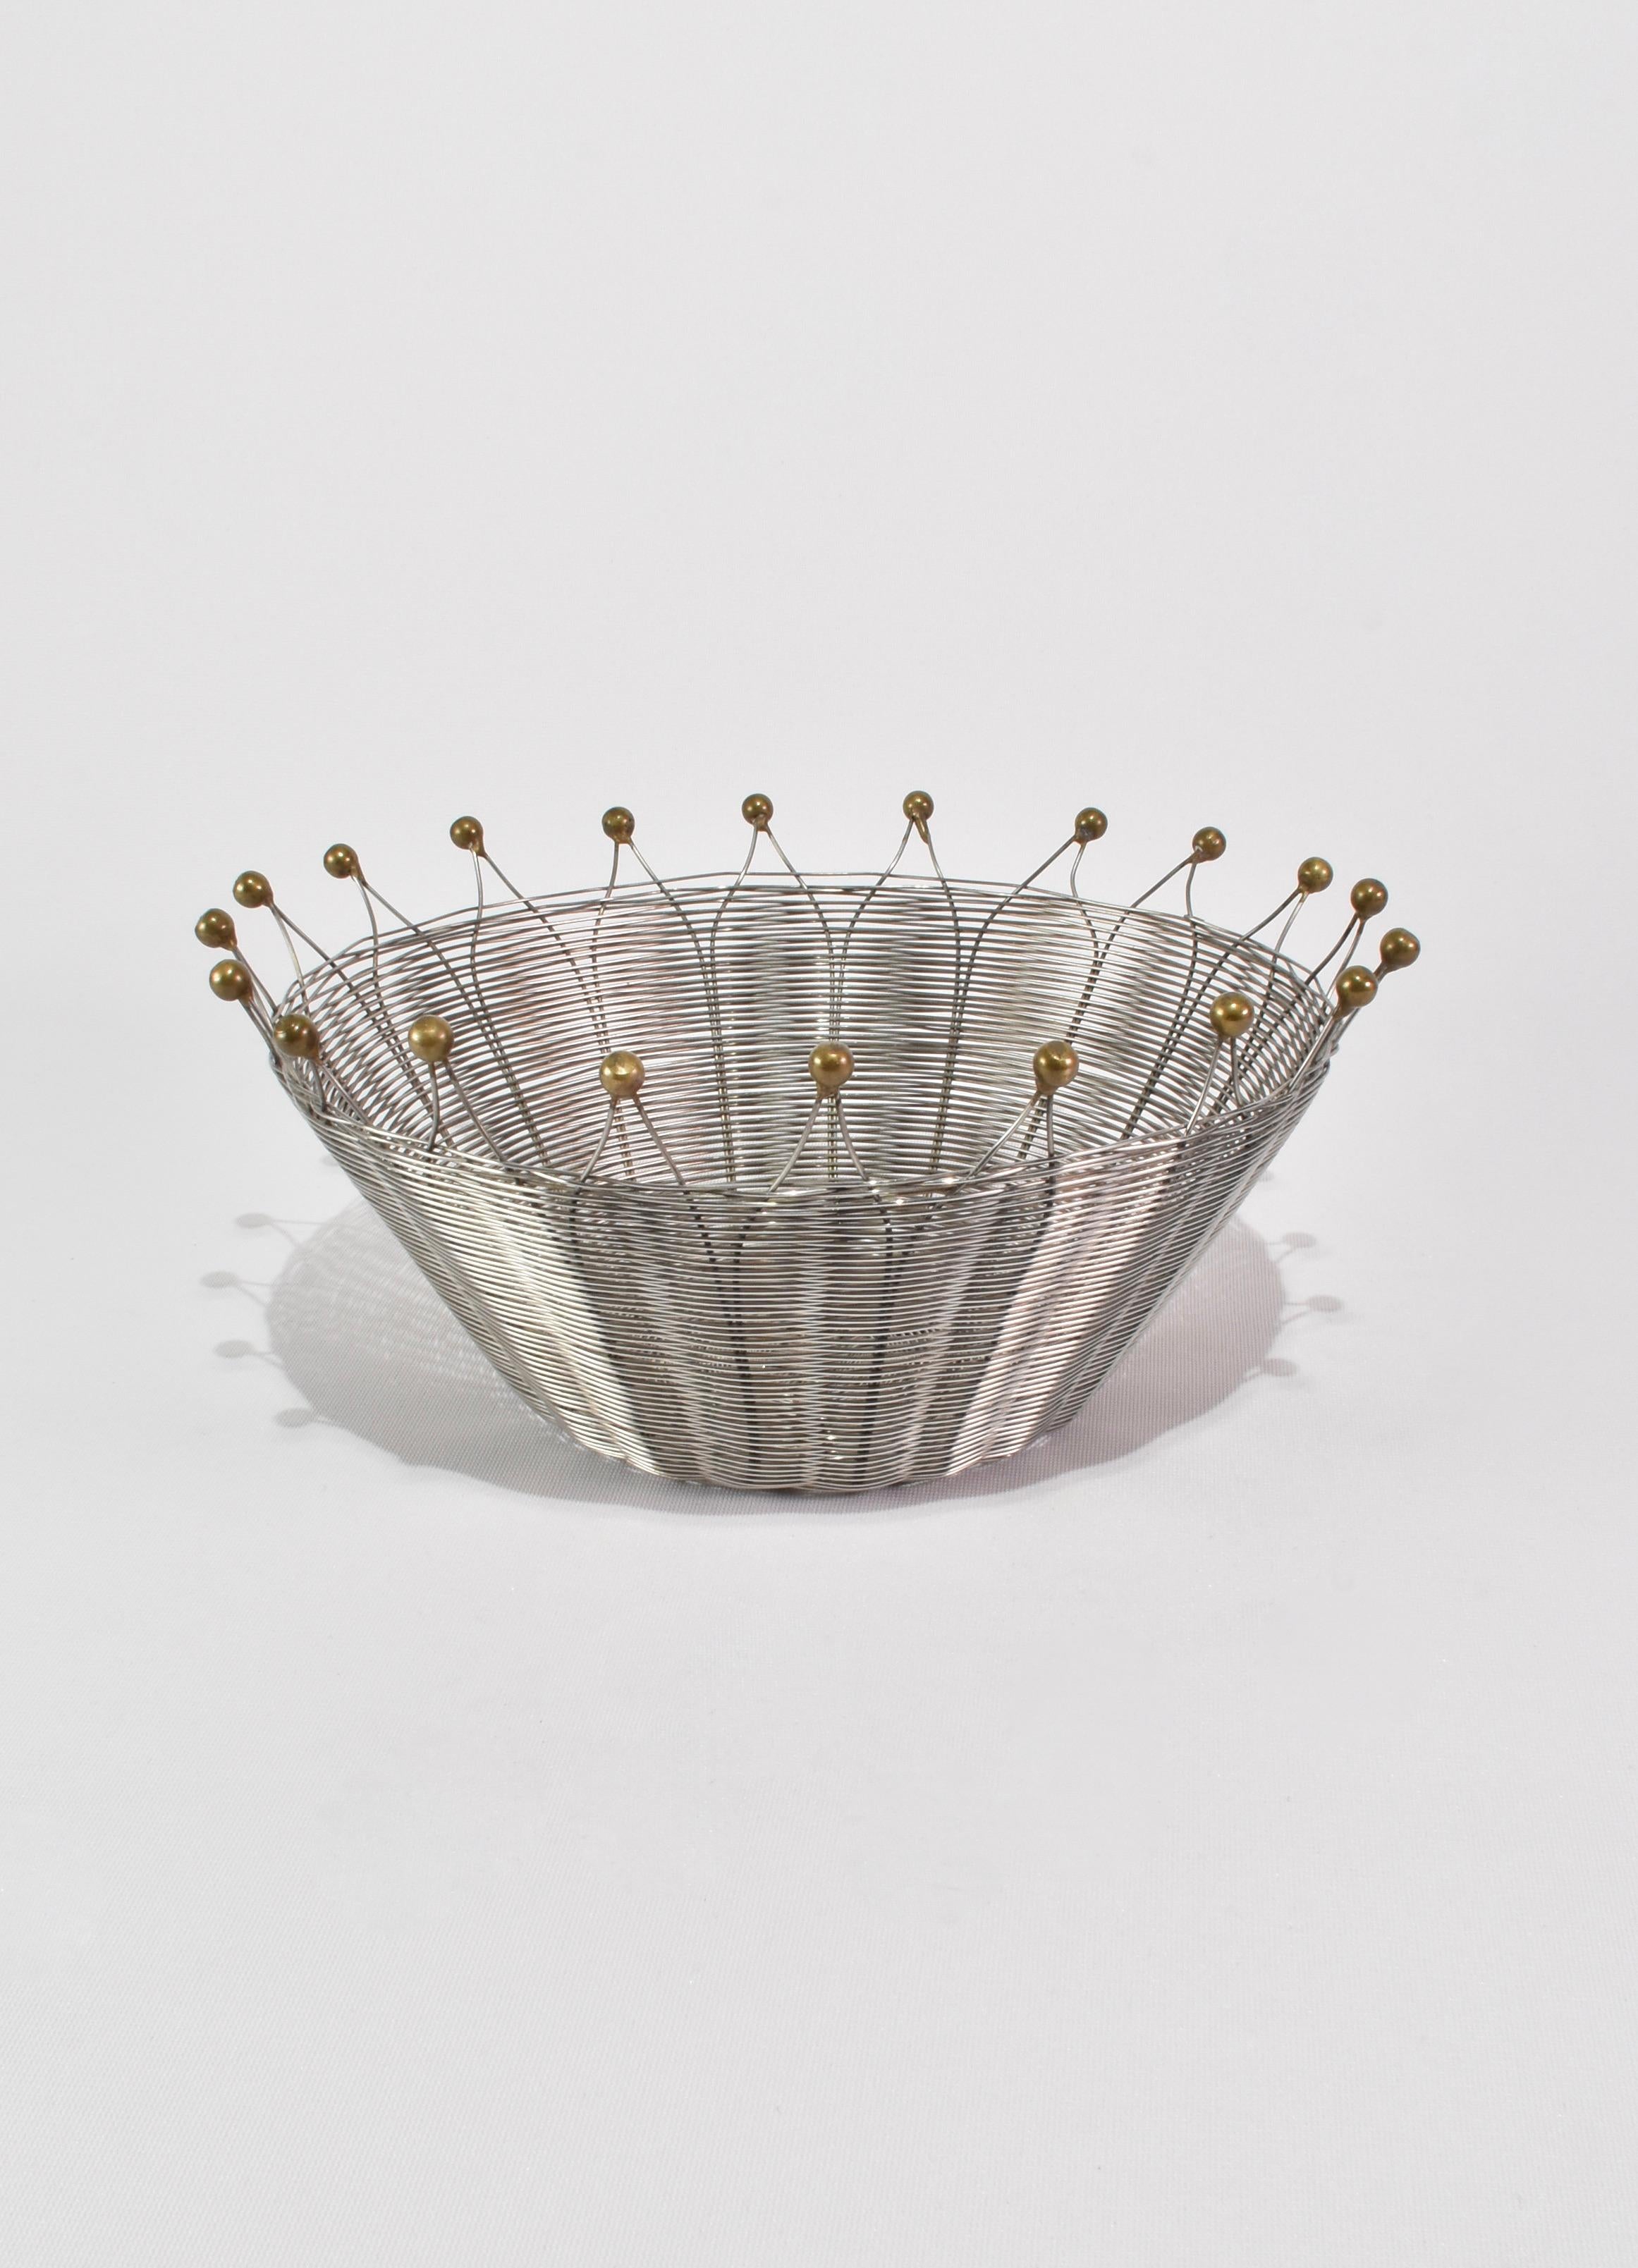 Stunning woven metal bowl with brass knob detail, attributed to Michael Aram. 